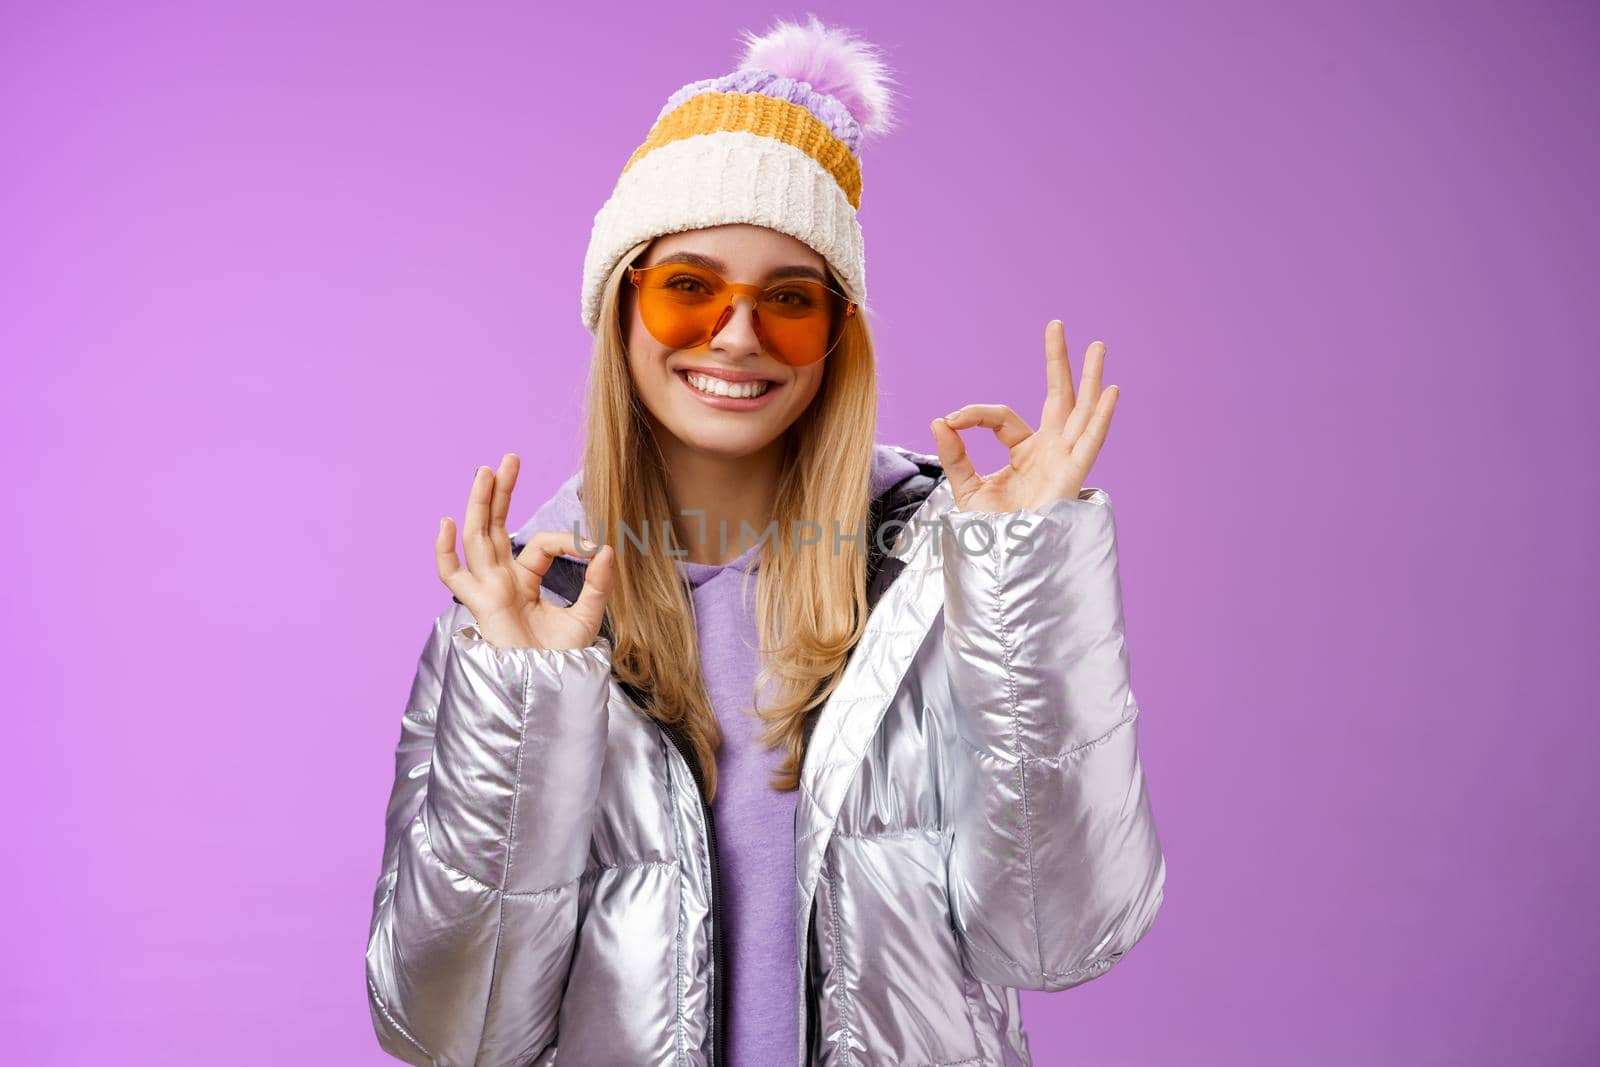 Everything fine thanks. Charming flirty blond confident woman in silver stylish jacket sunglasses winter hat show okay no problem ok gesture smiling affirmative, liking awesome day purple background.